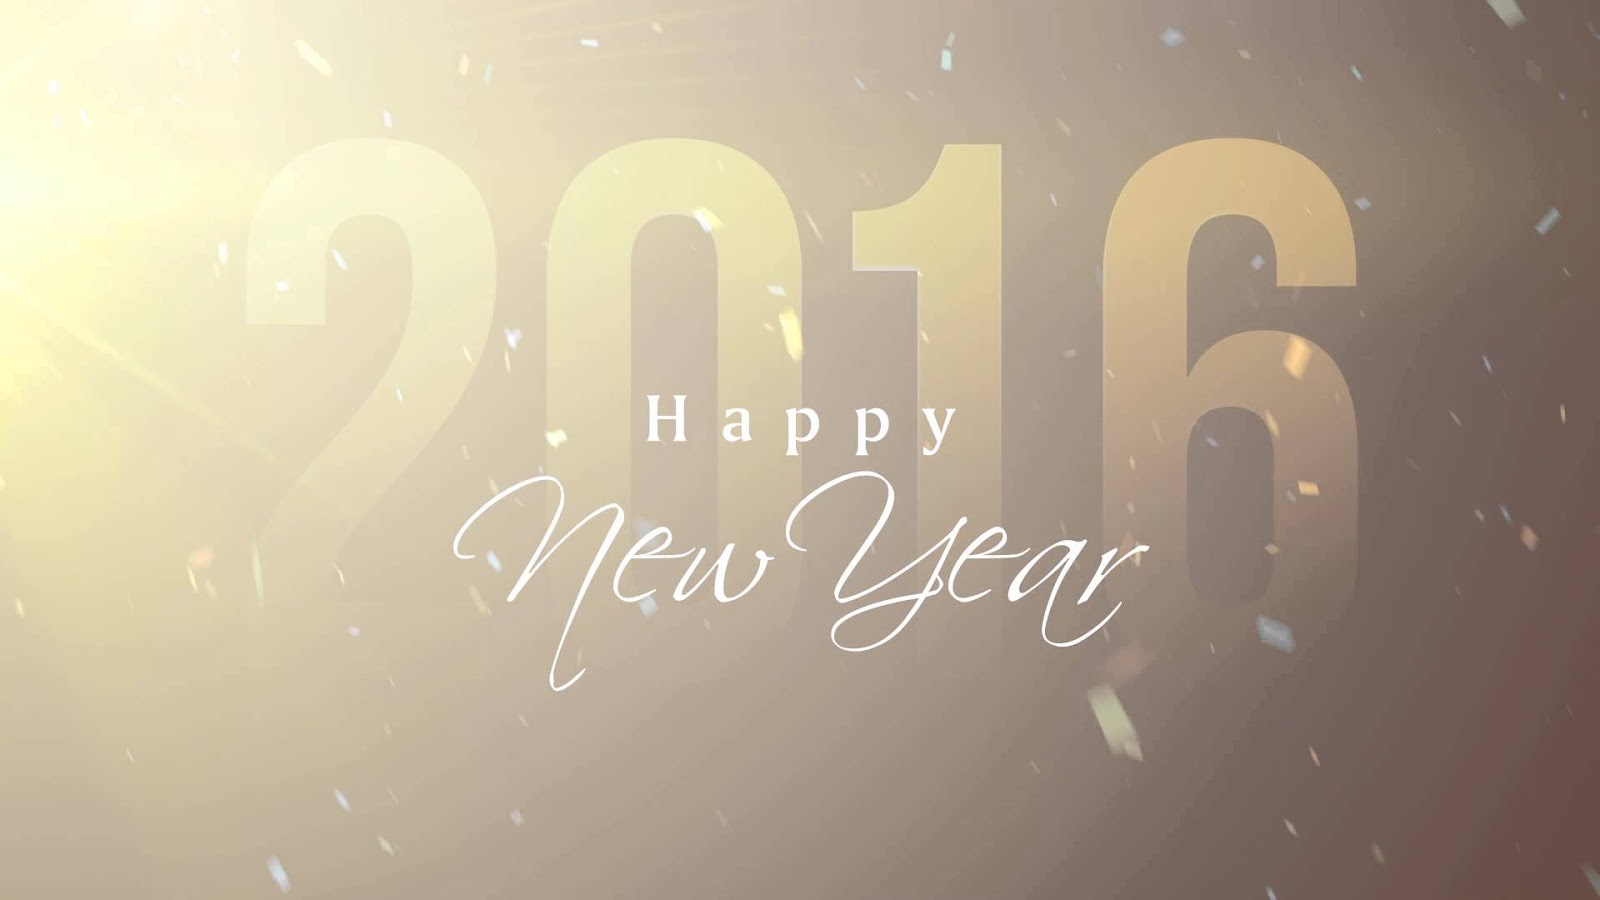 Happy New Year 2016 Images Happy New Year 2016 Wishes Wallpapers